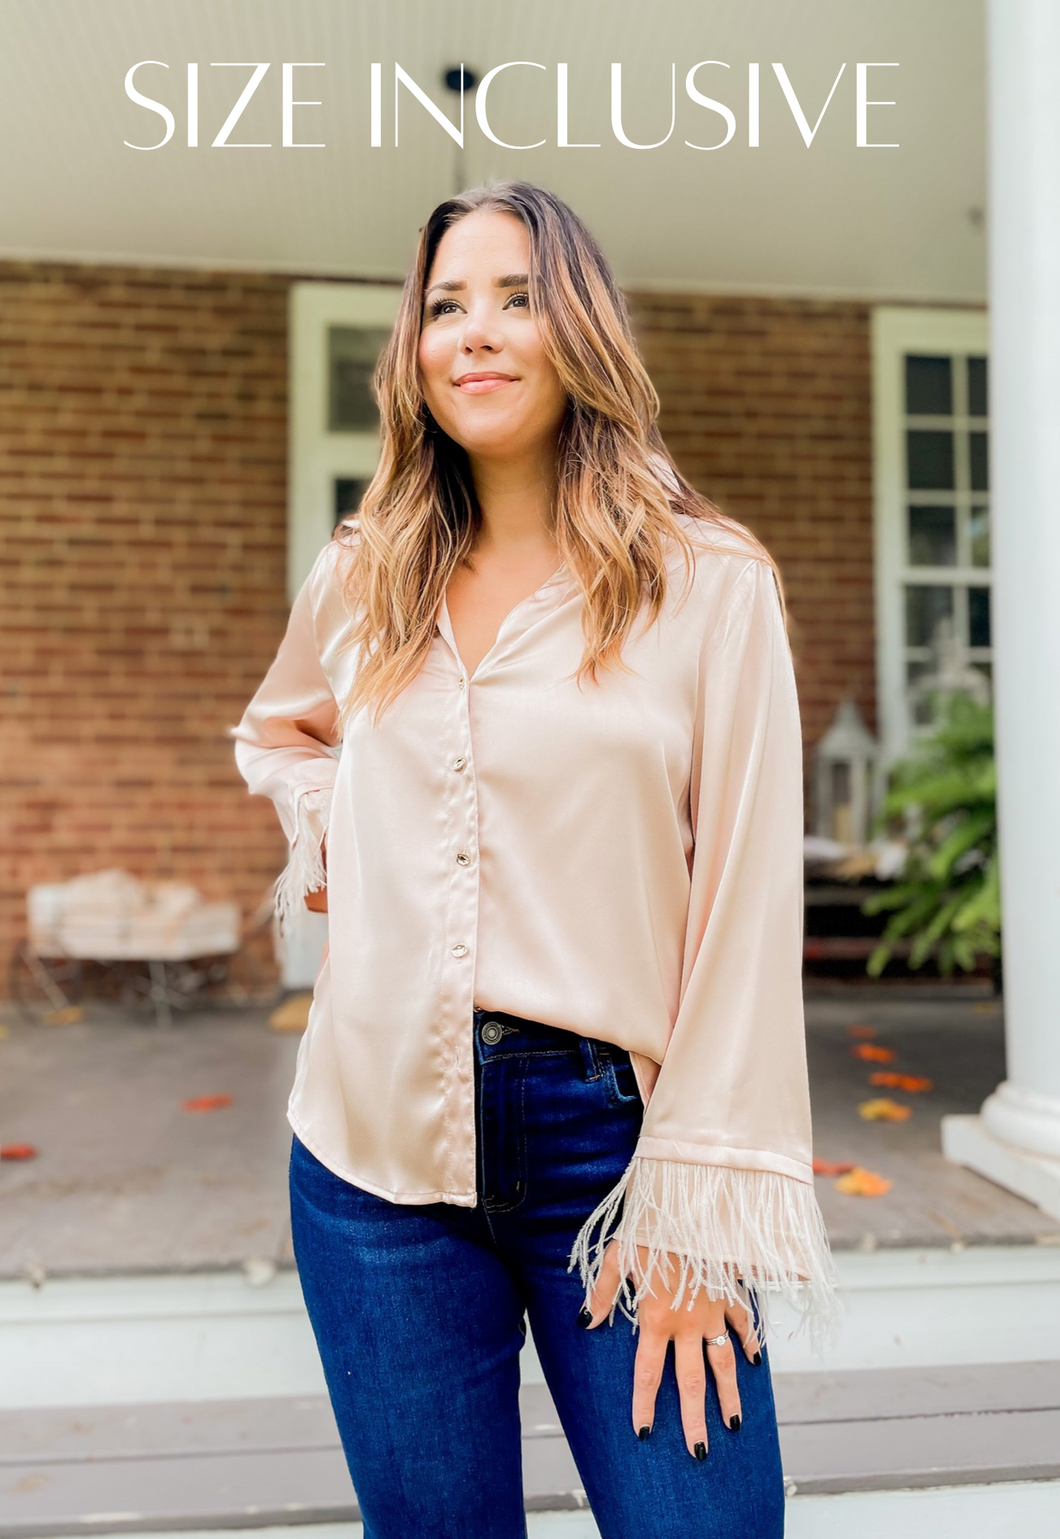 Ruffled Feathers Button Up Blouse